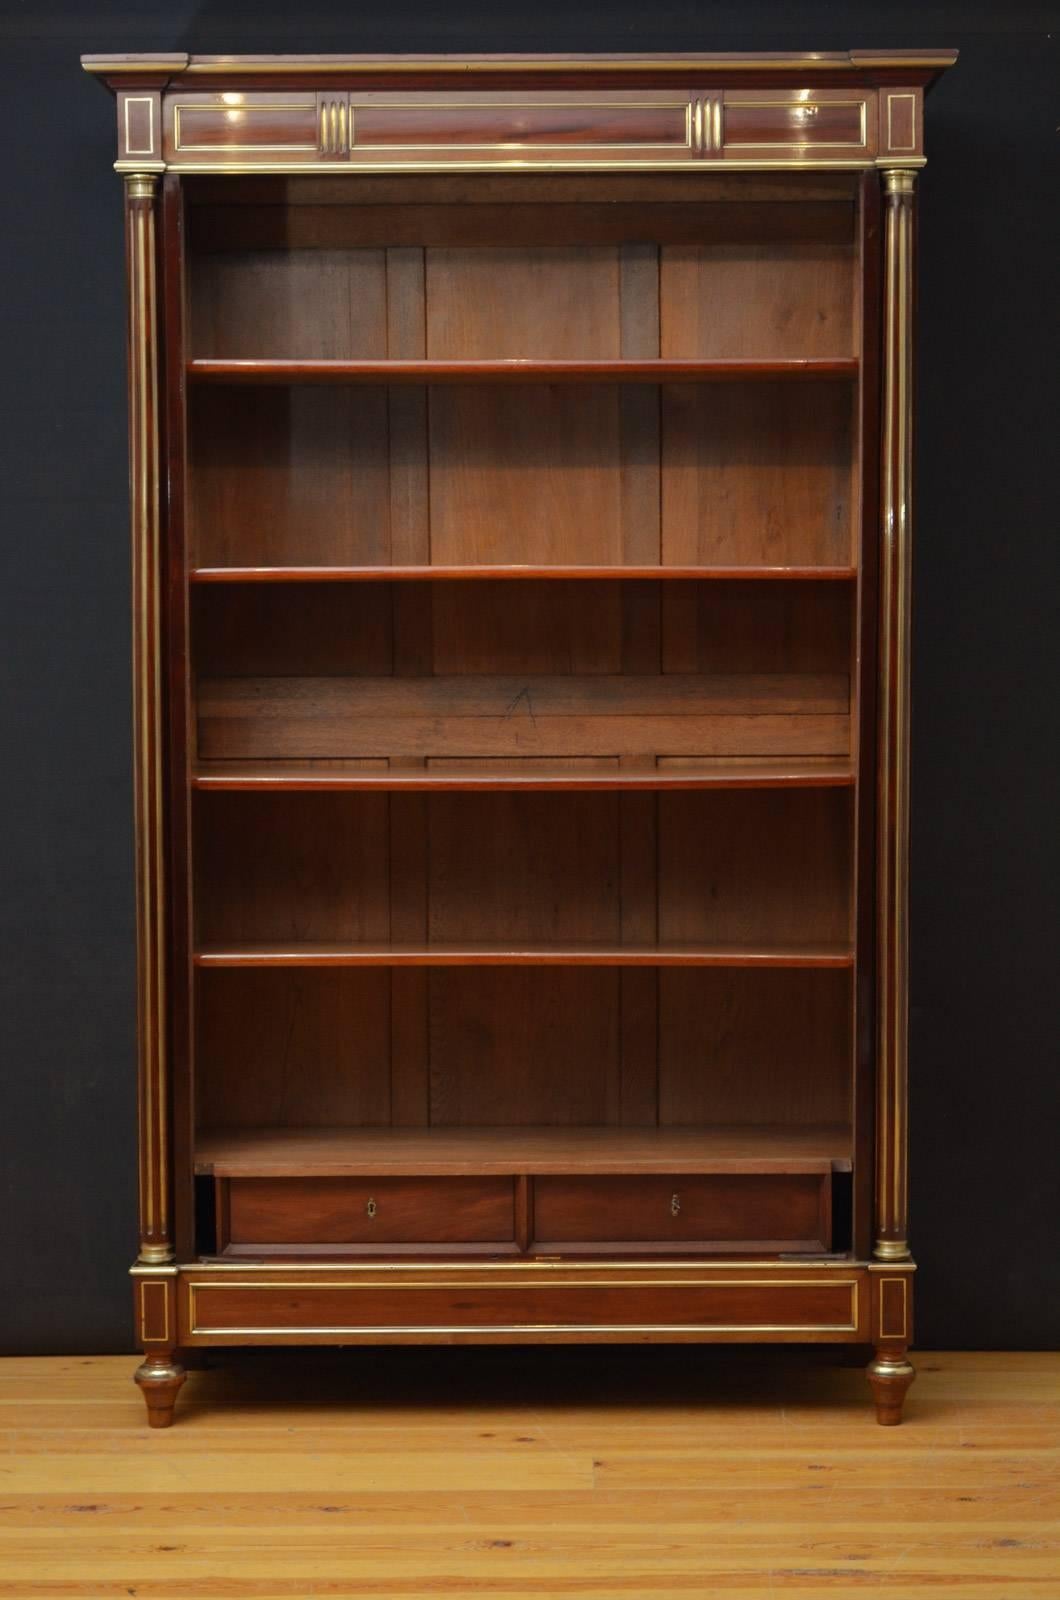 Sn4269 fantastic 19th century brass inlaid bookcase in mahogany, having moulded cornice above a pair of bevelled edge glazed doors fitted with original working lock and a key and enclosing 4 height adjustable shelves and two drawers, all flanked by